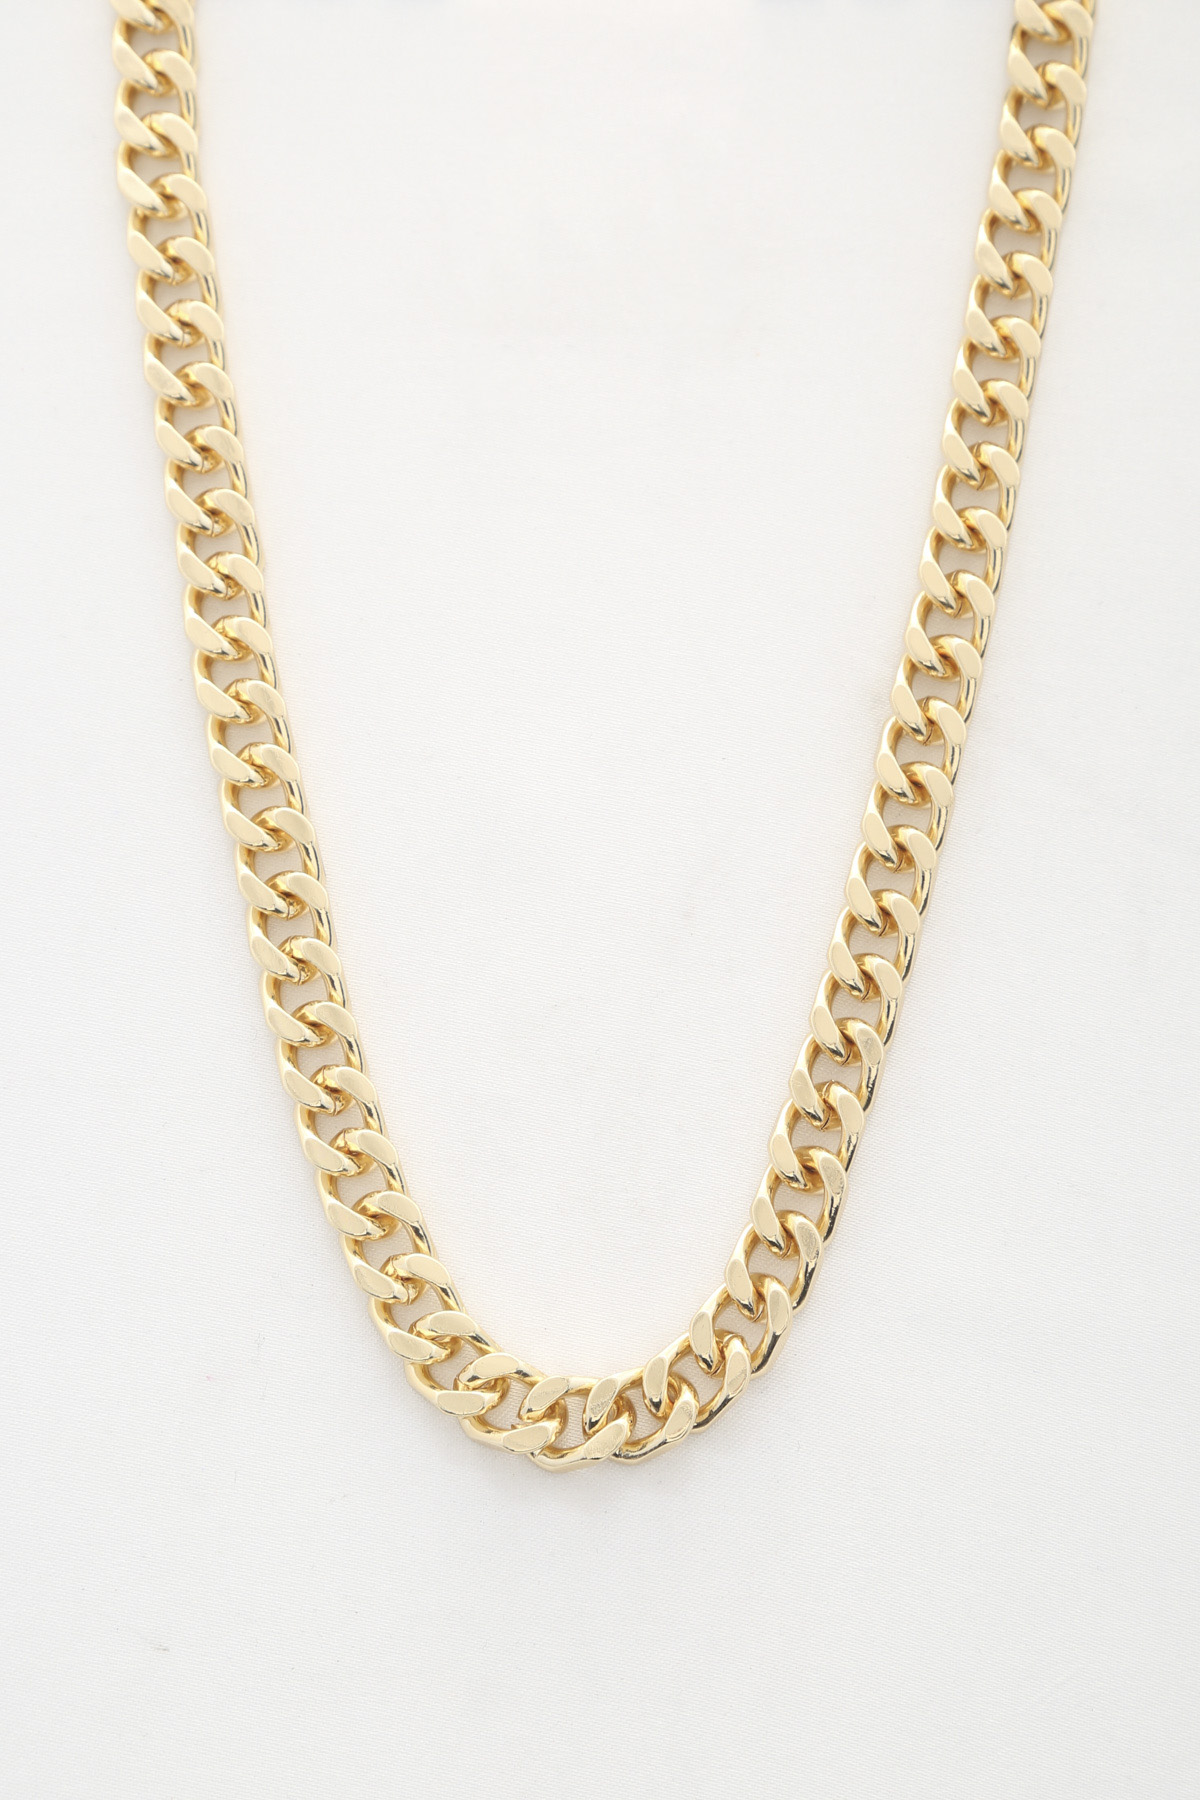 CURB LINK NECKLACE